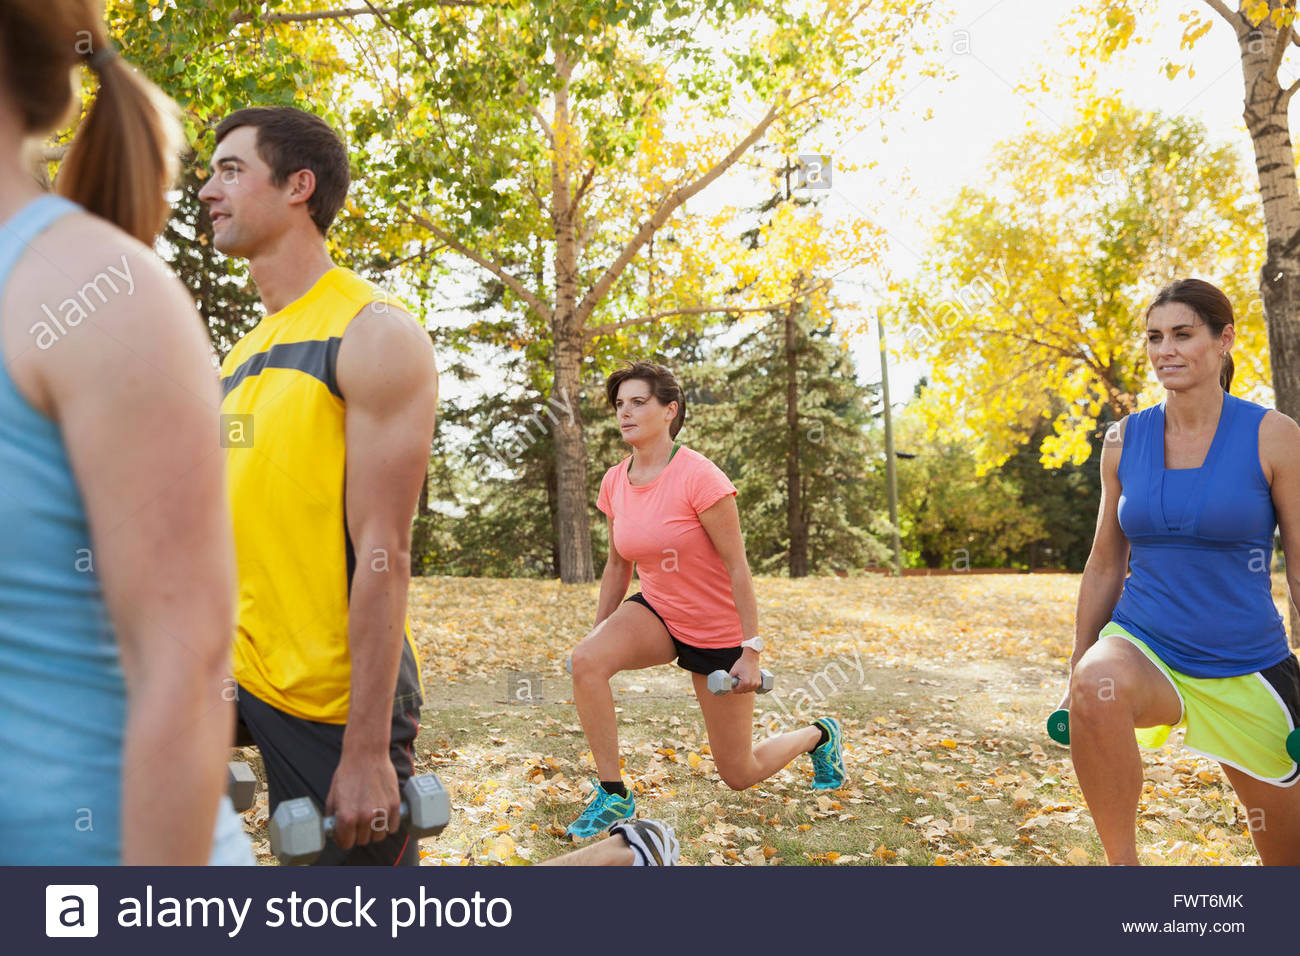 People using weights at outdoor fitness class. Stock Photo